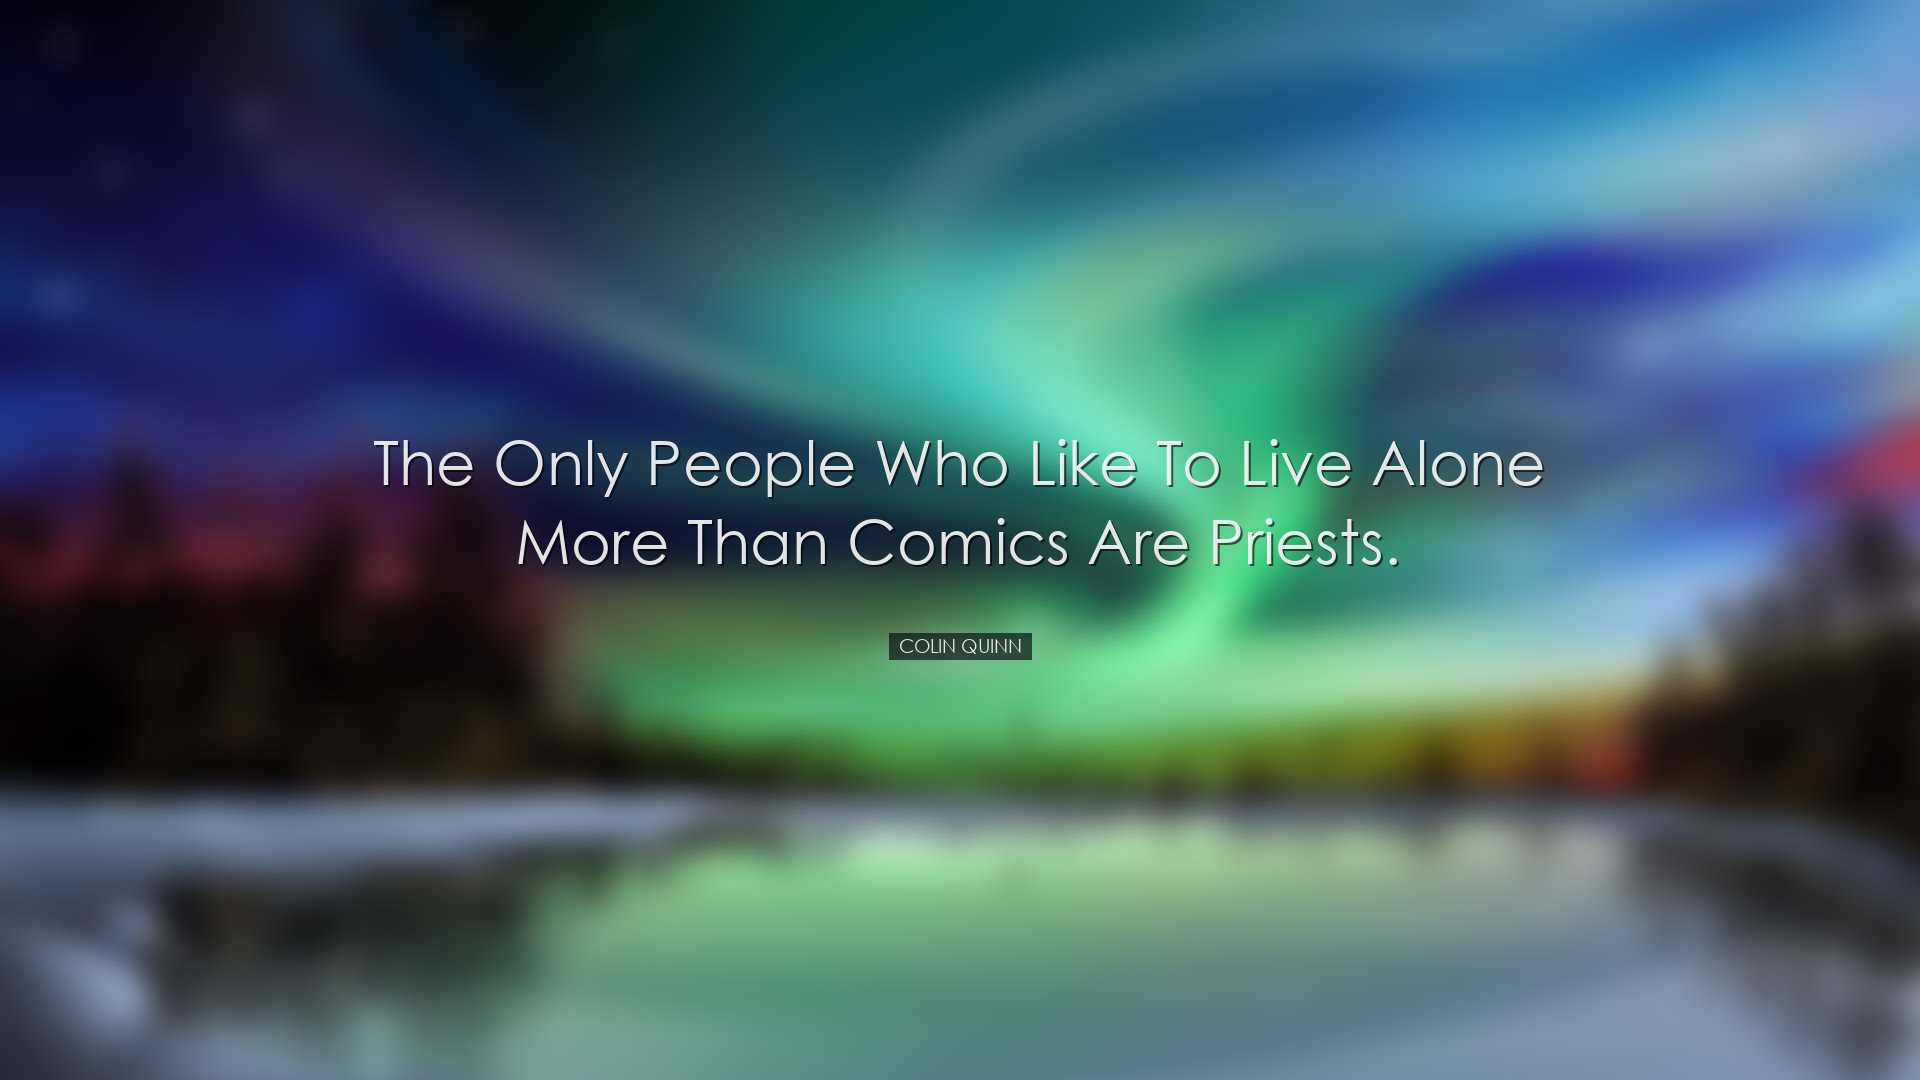 The only people who like to live alone more than comics are priest